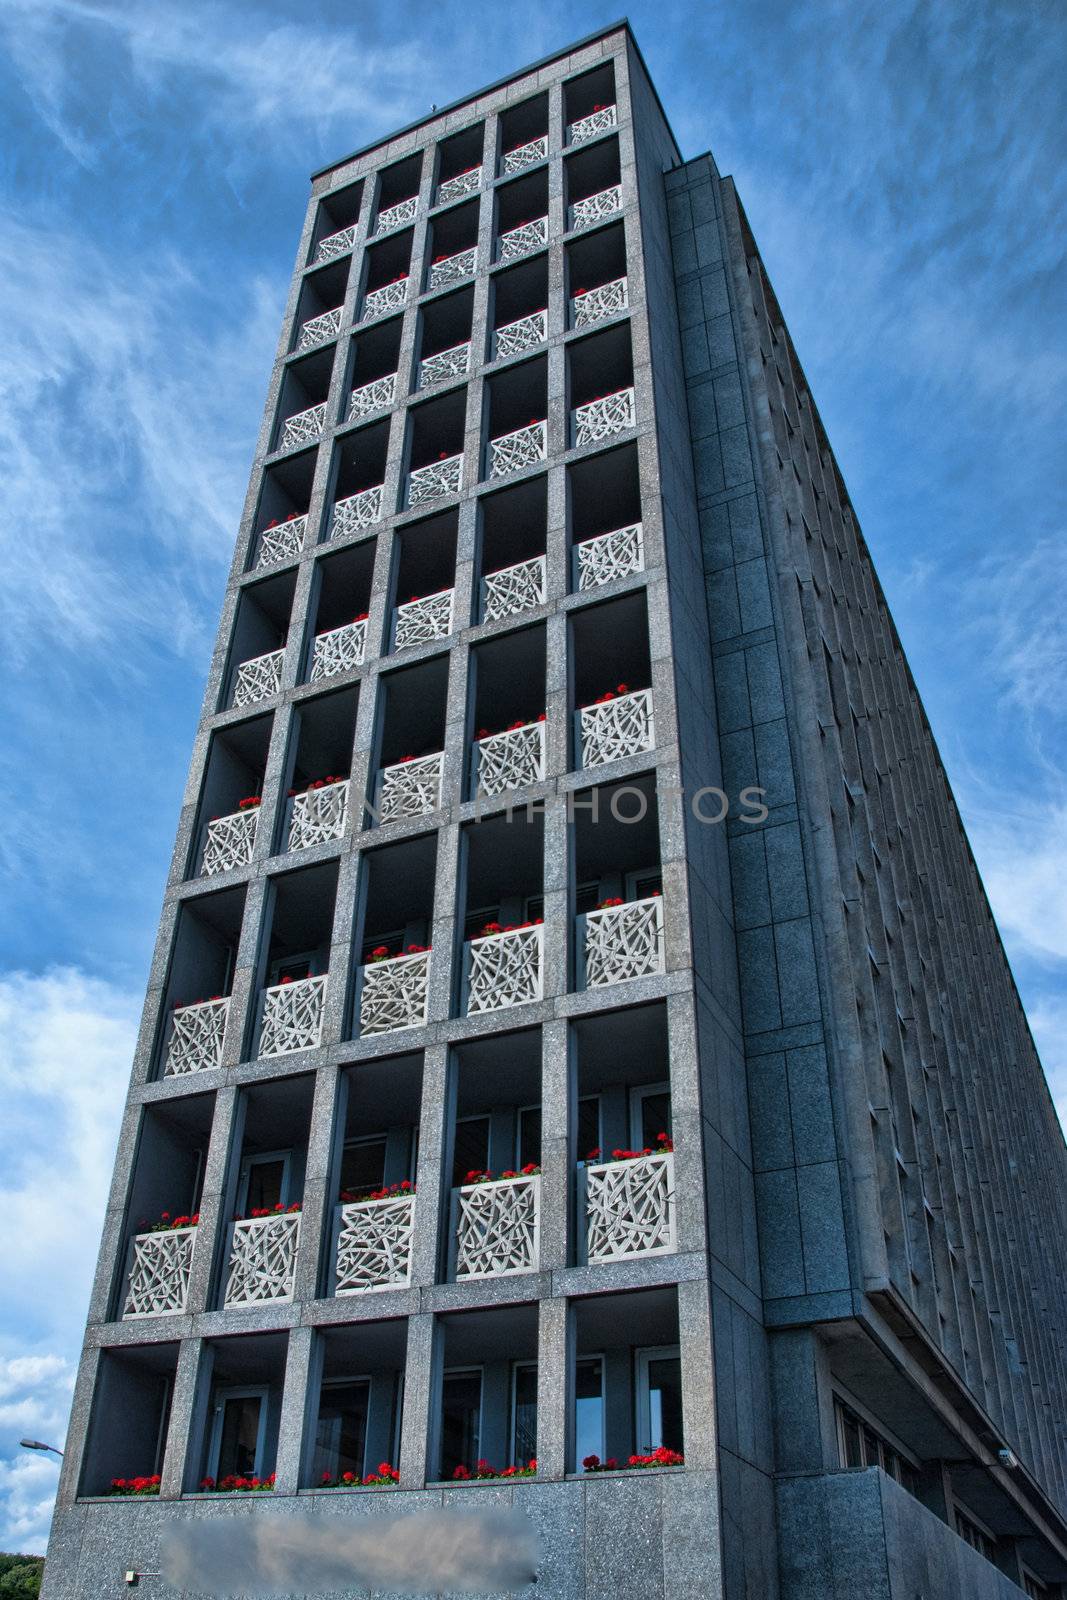 Architectural Detail in Oslo, Norway, 2009